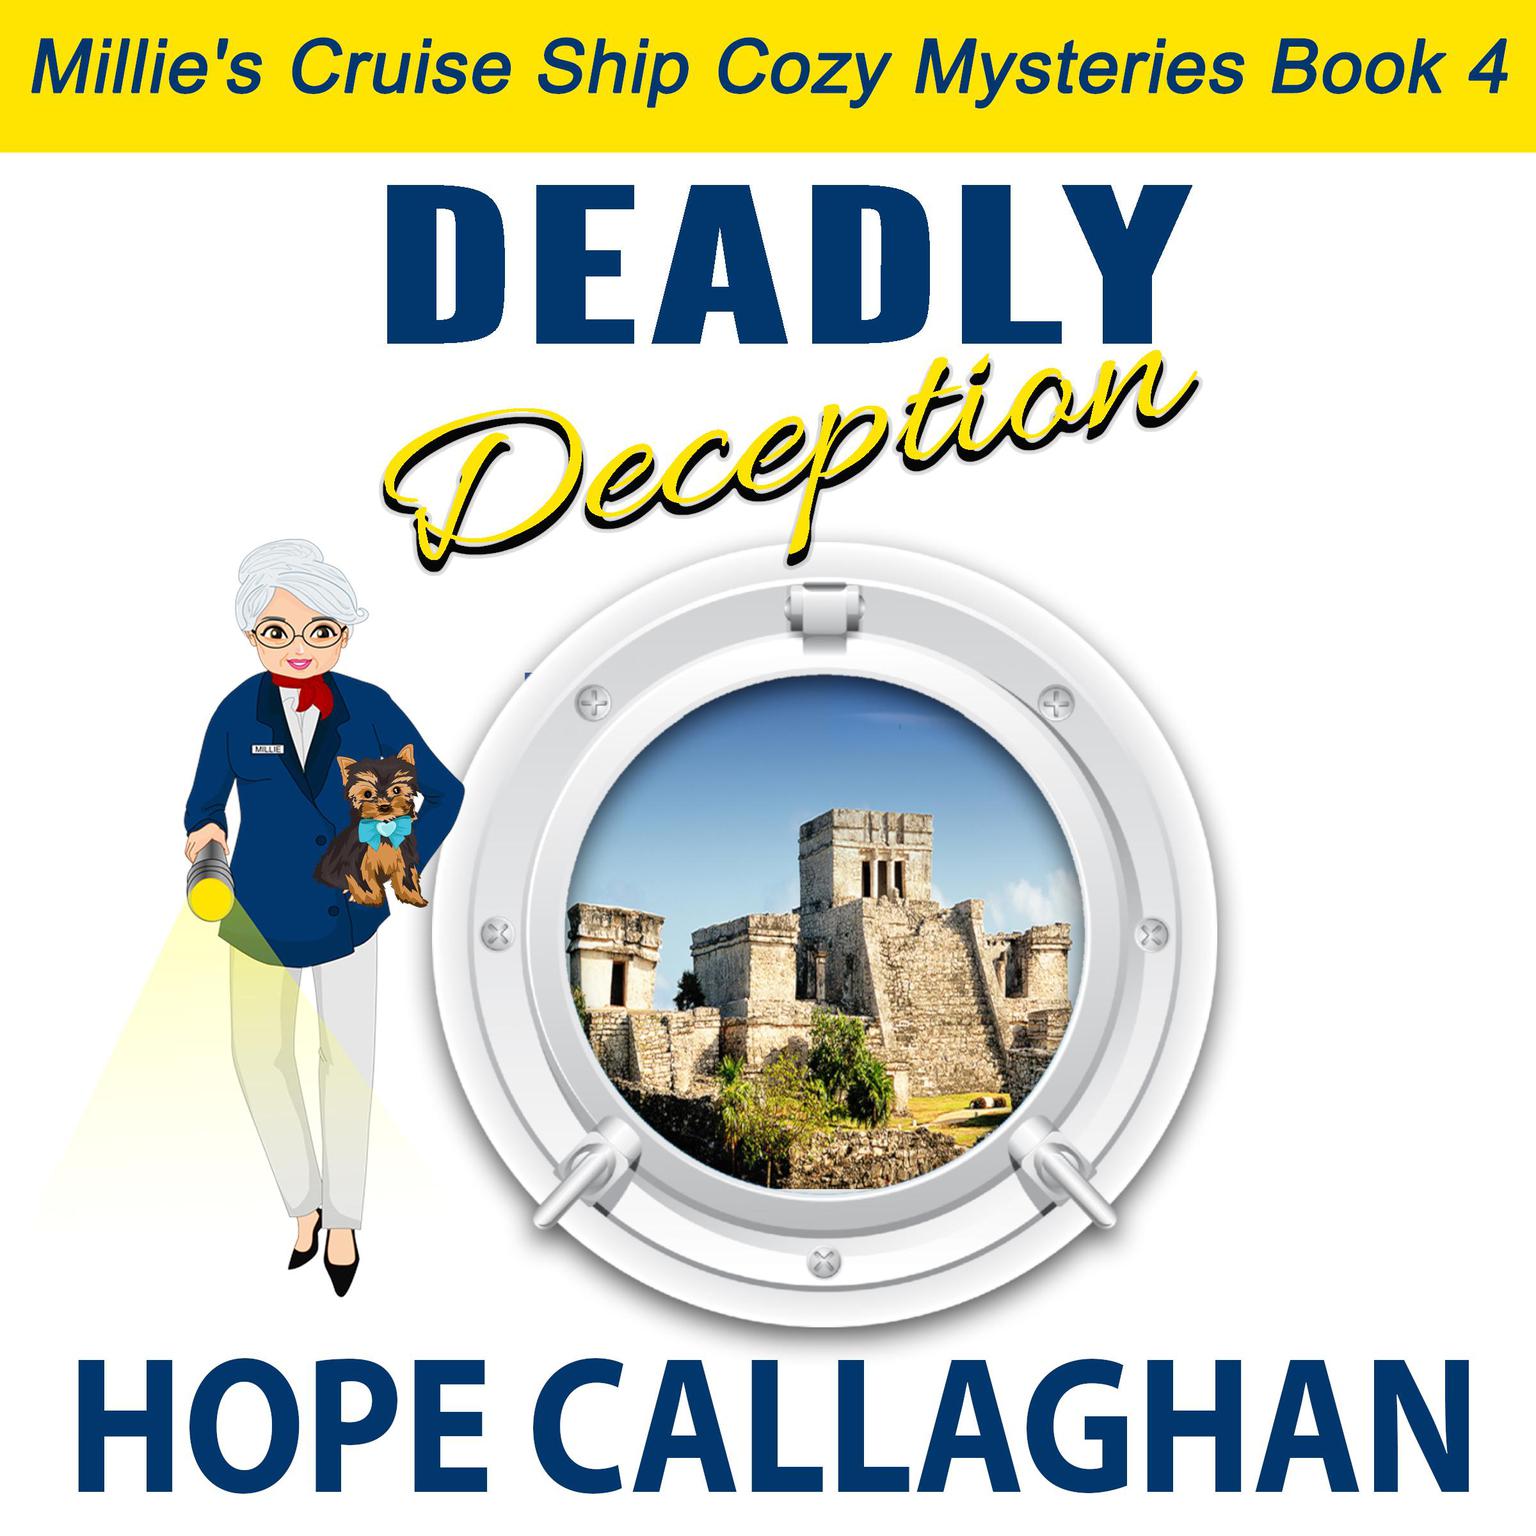 Deadly Deception: Millies Cruise Ship Mysteries Book 4 Audiobook, by Hope Callaghan